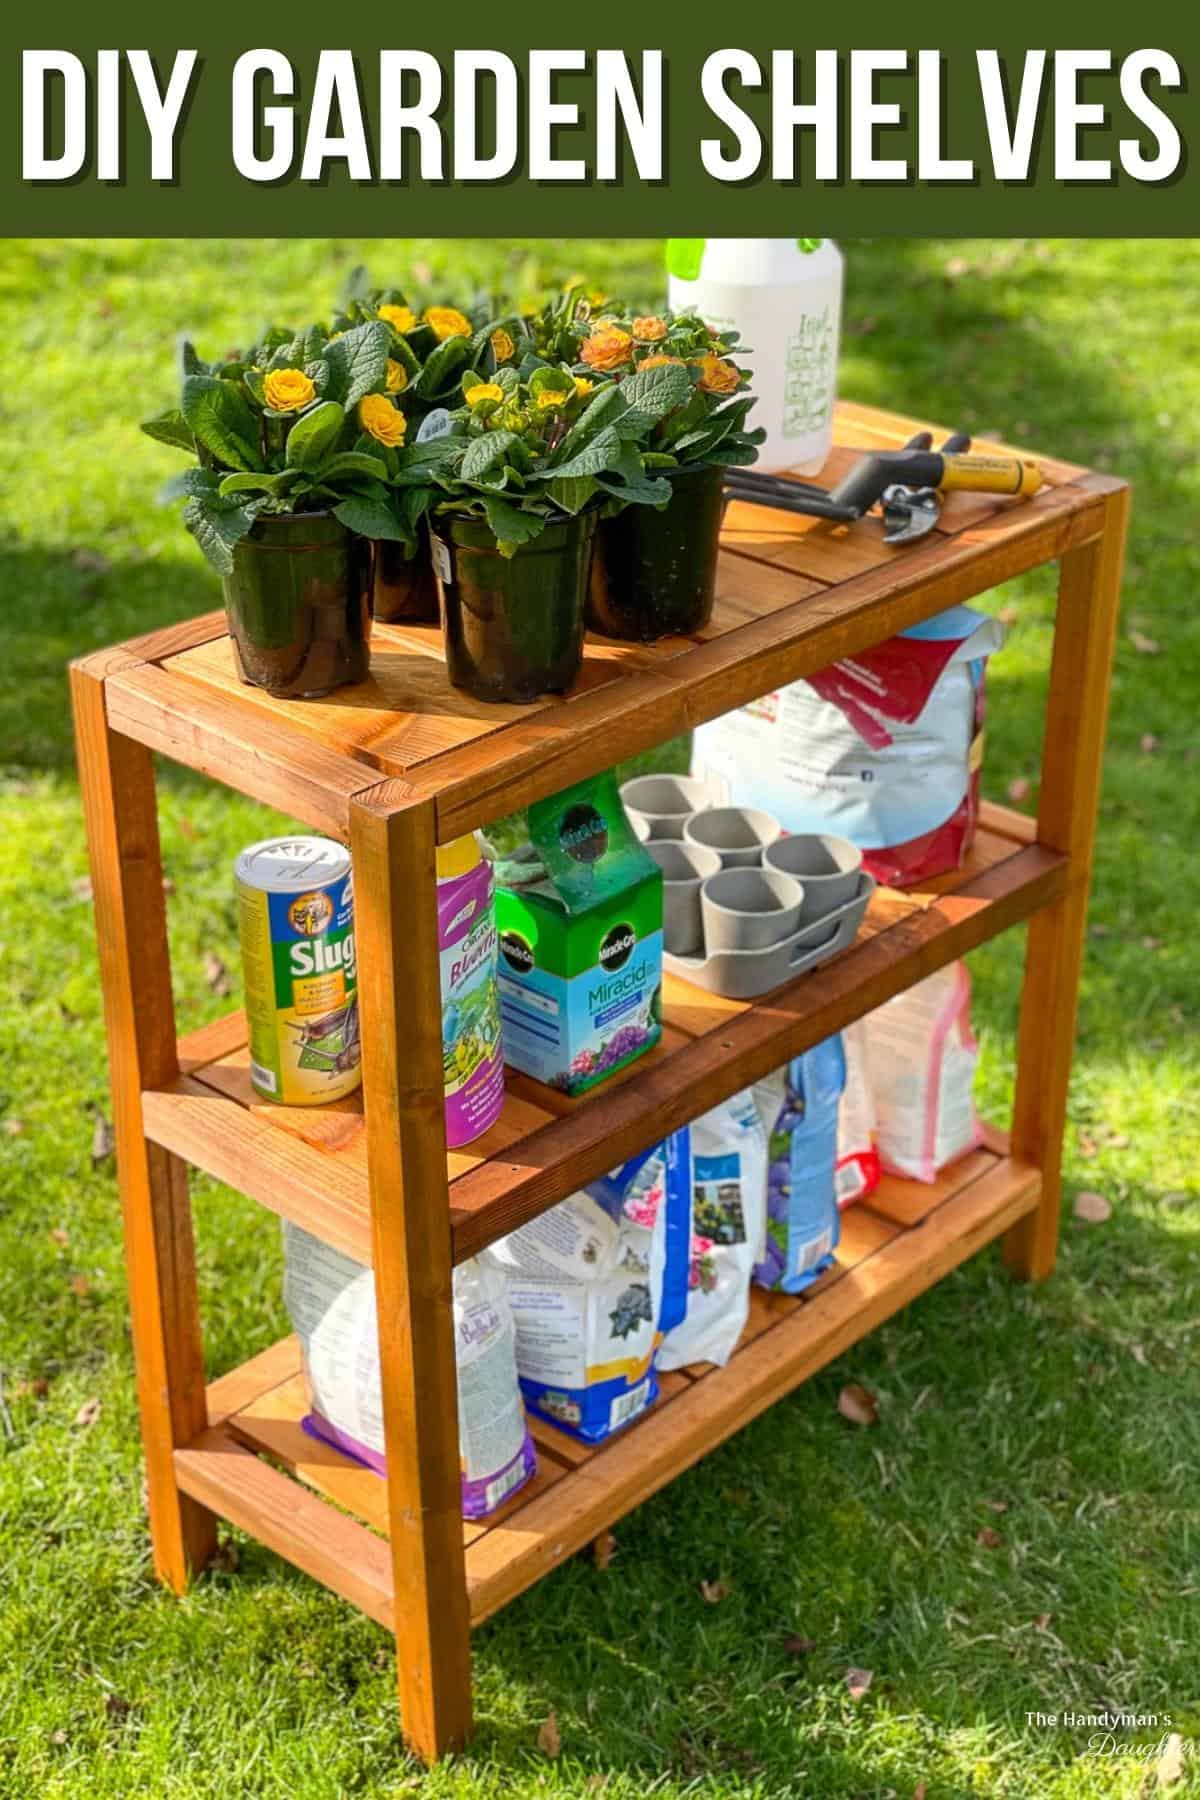 DIY outdoor shelves for plants and gardening supplies